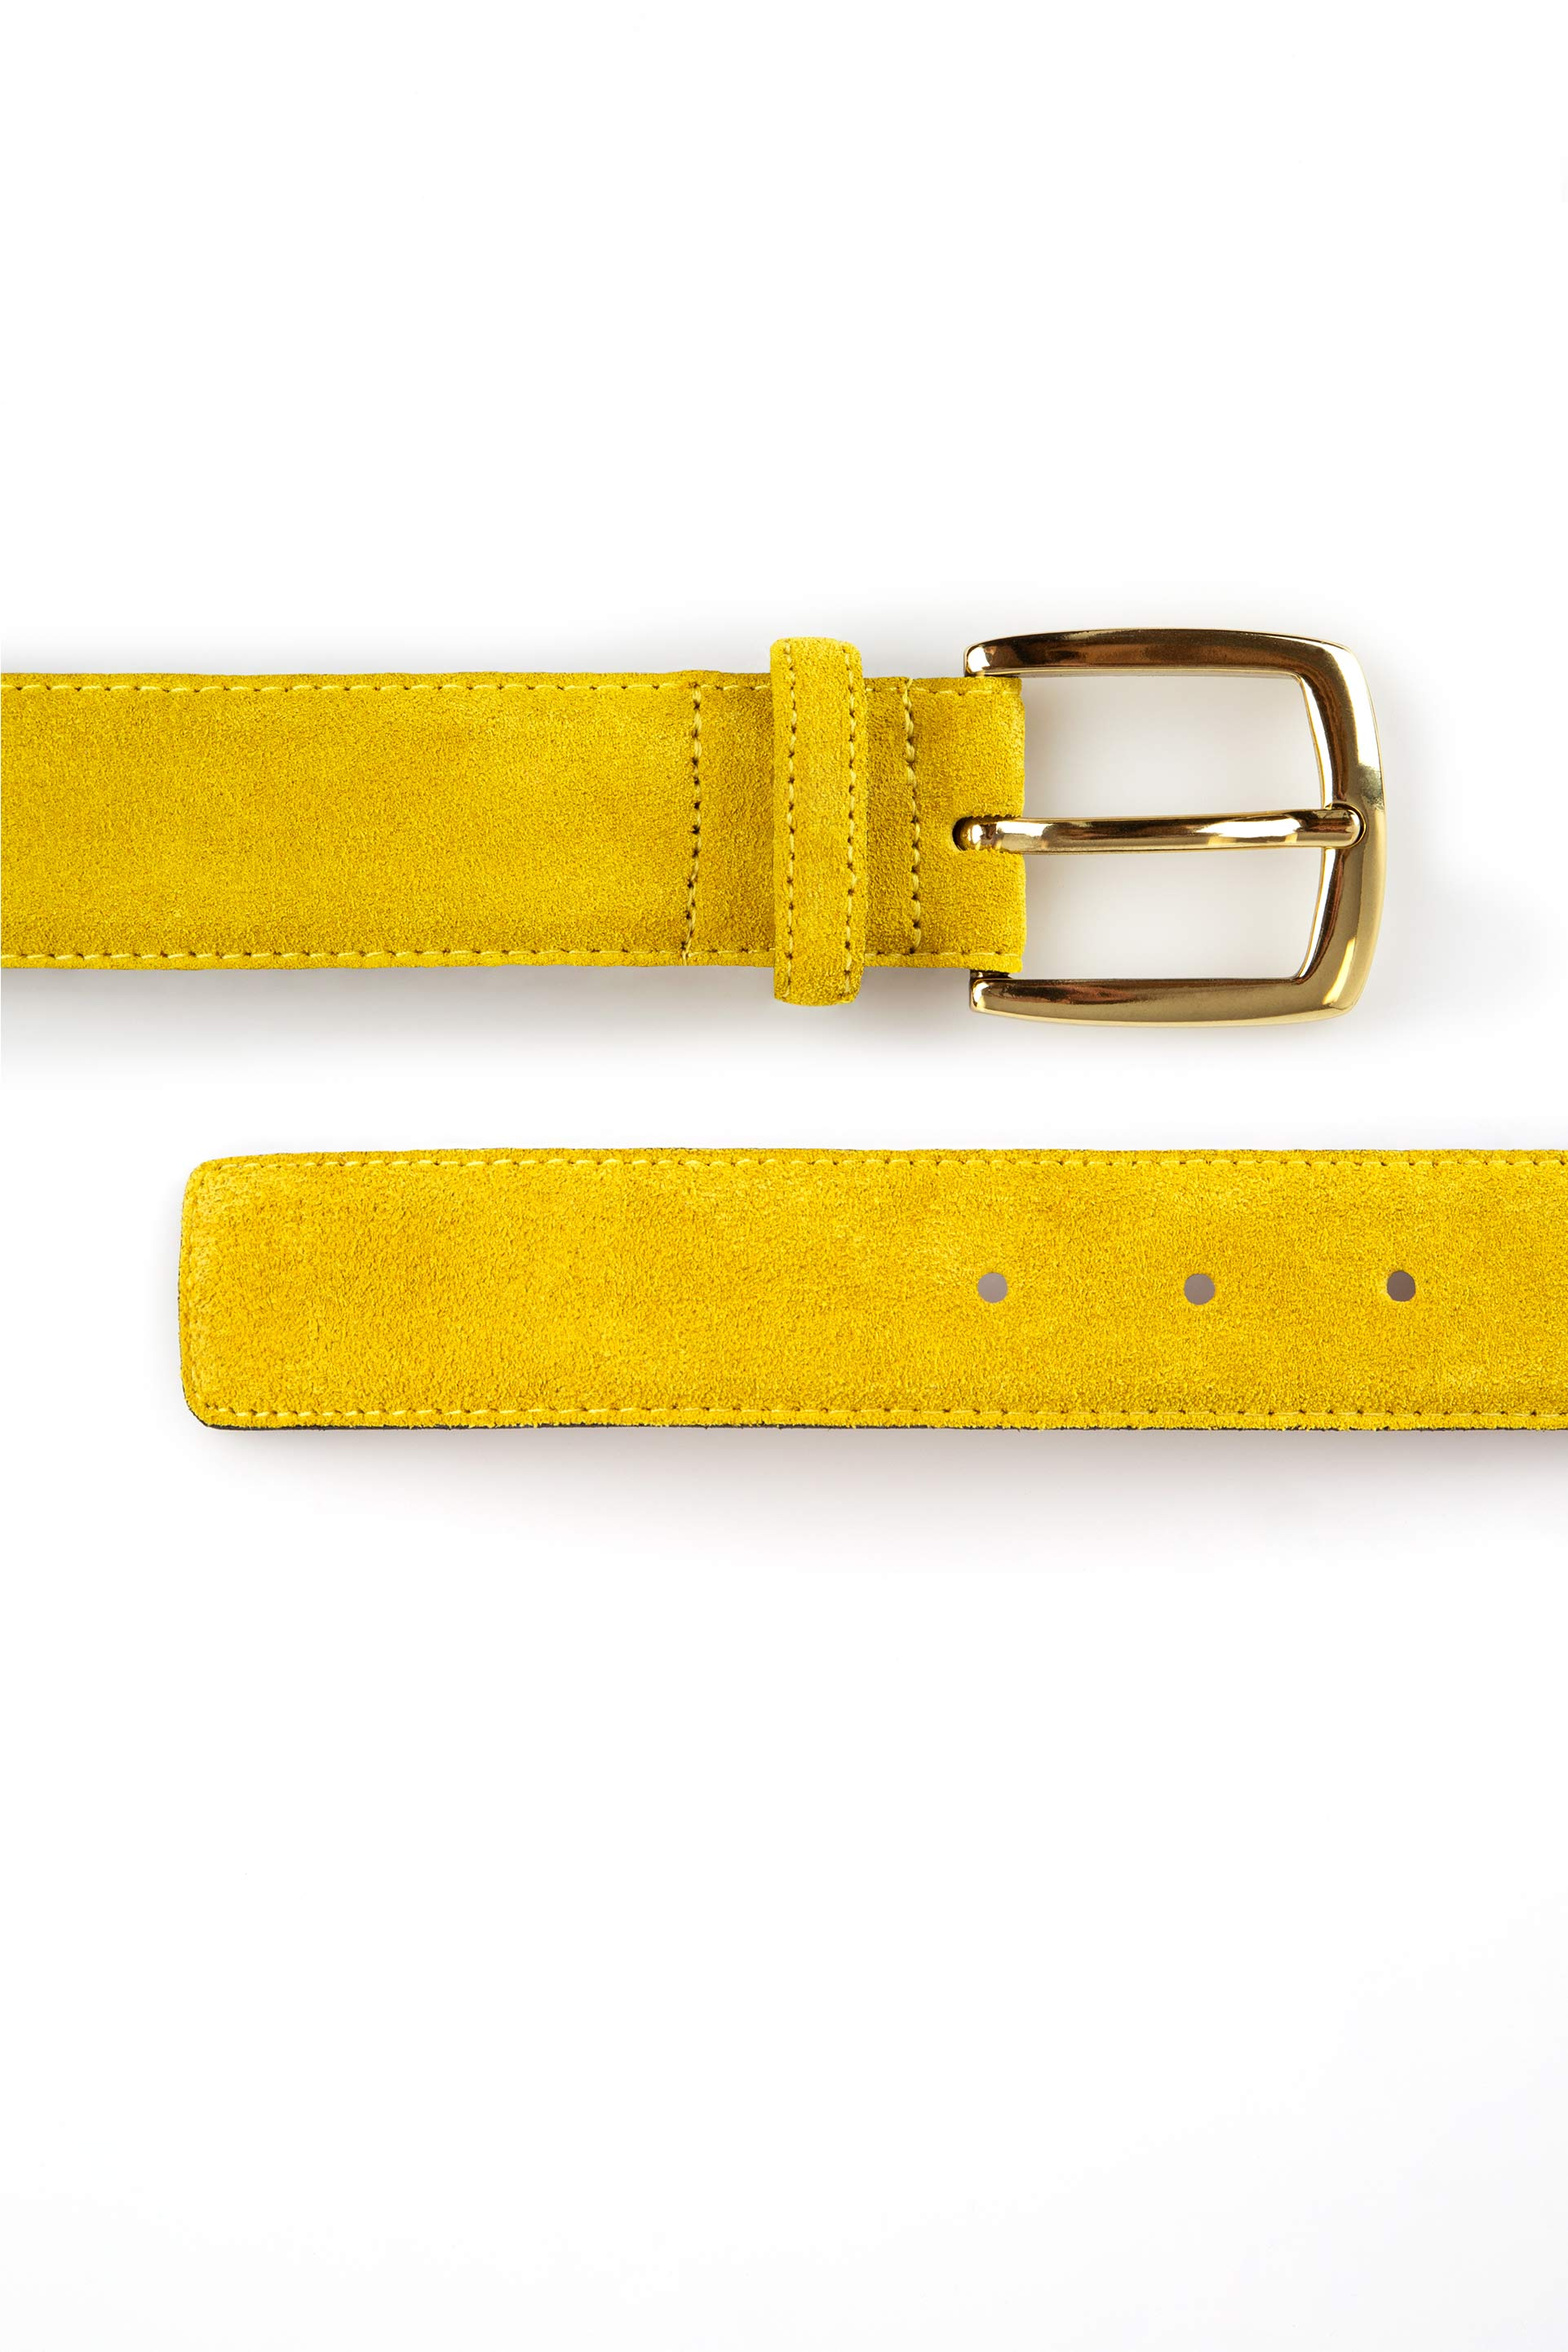 be500_classic_suede_belt_yellow_ochre_suede_white_background.jpg